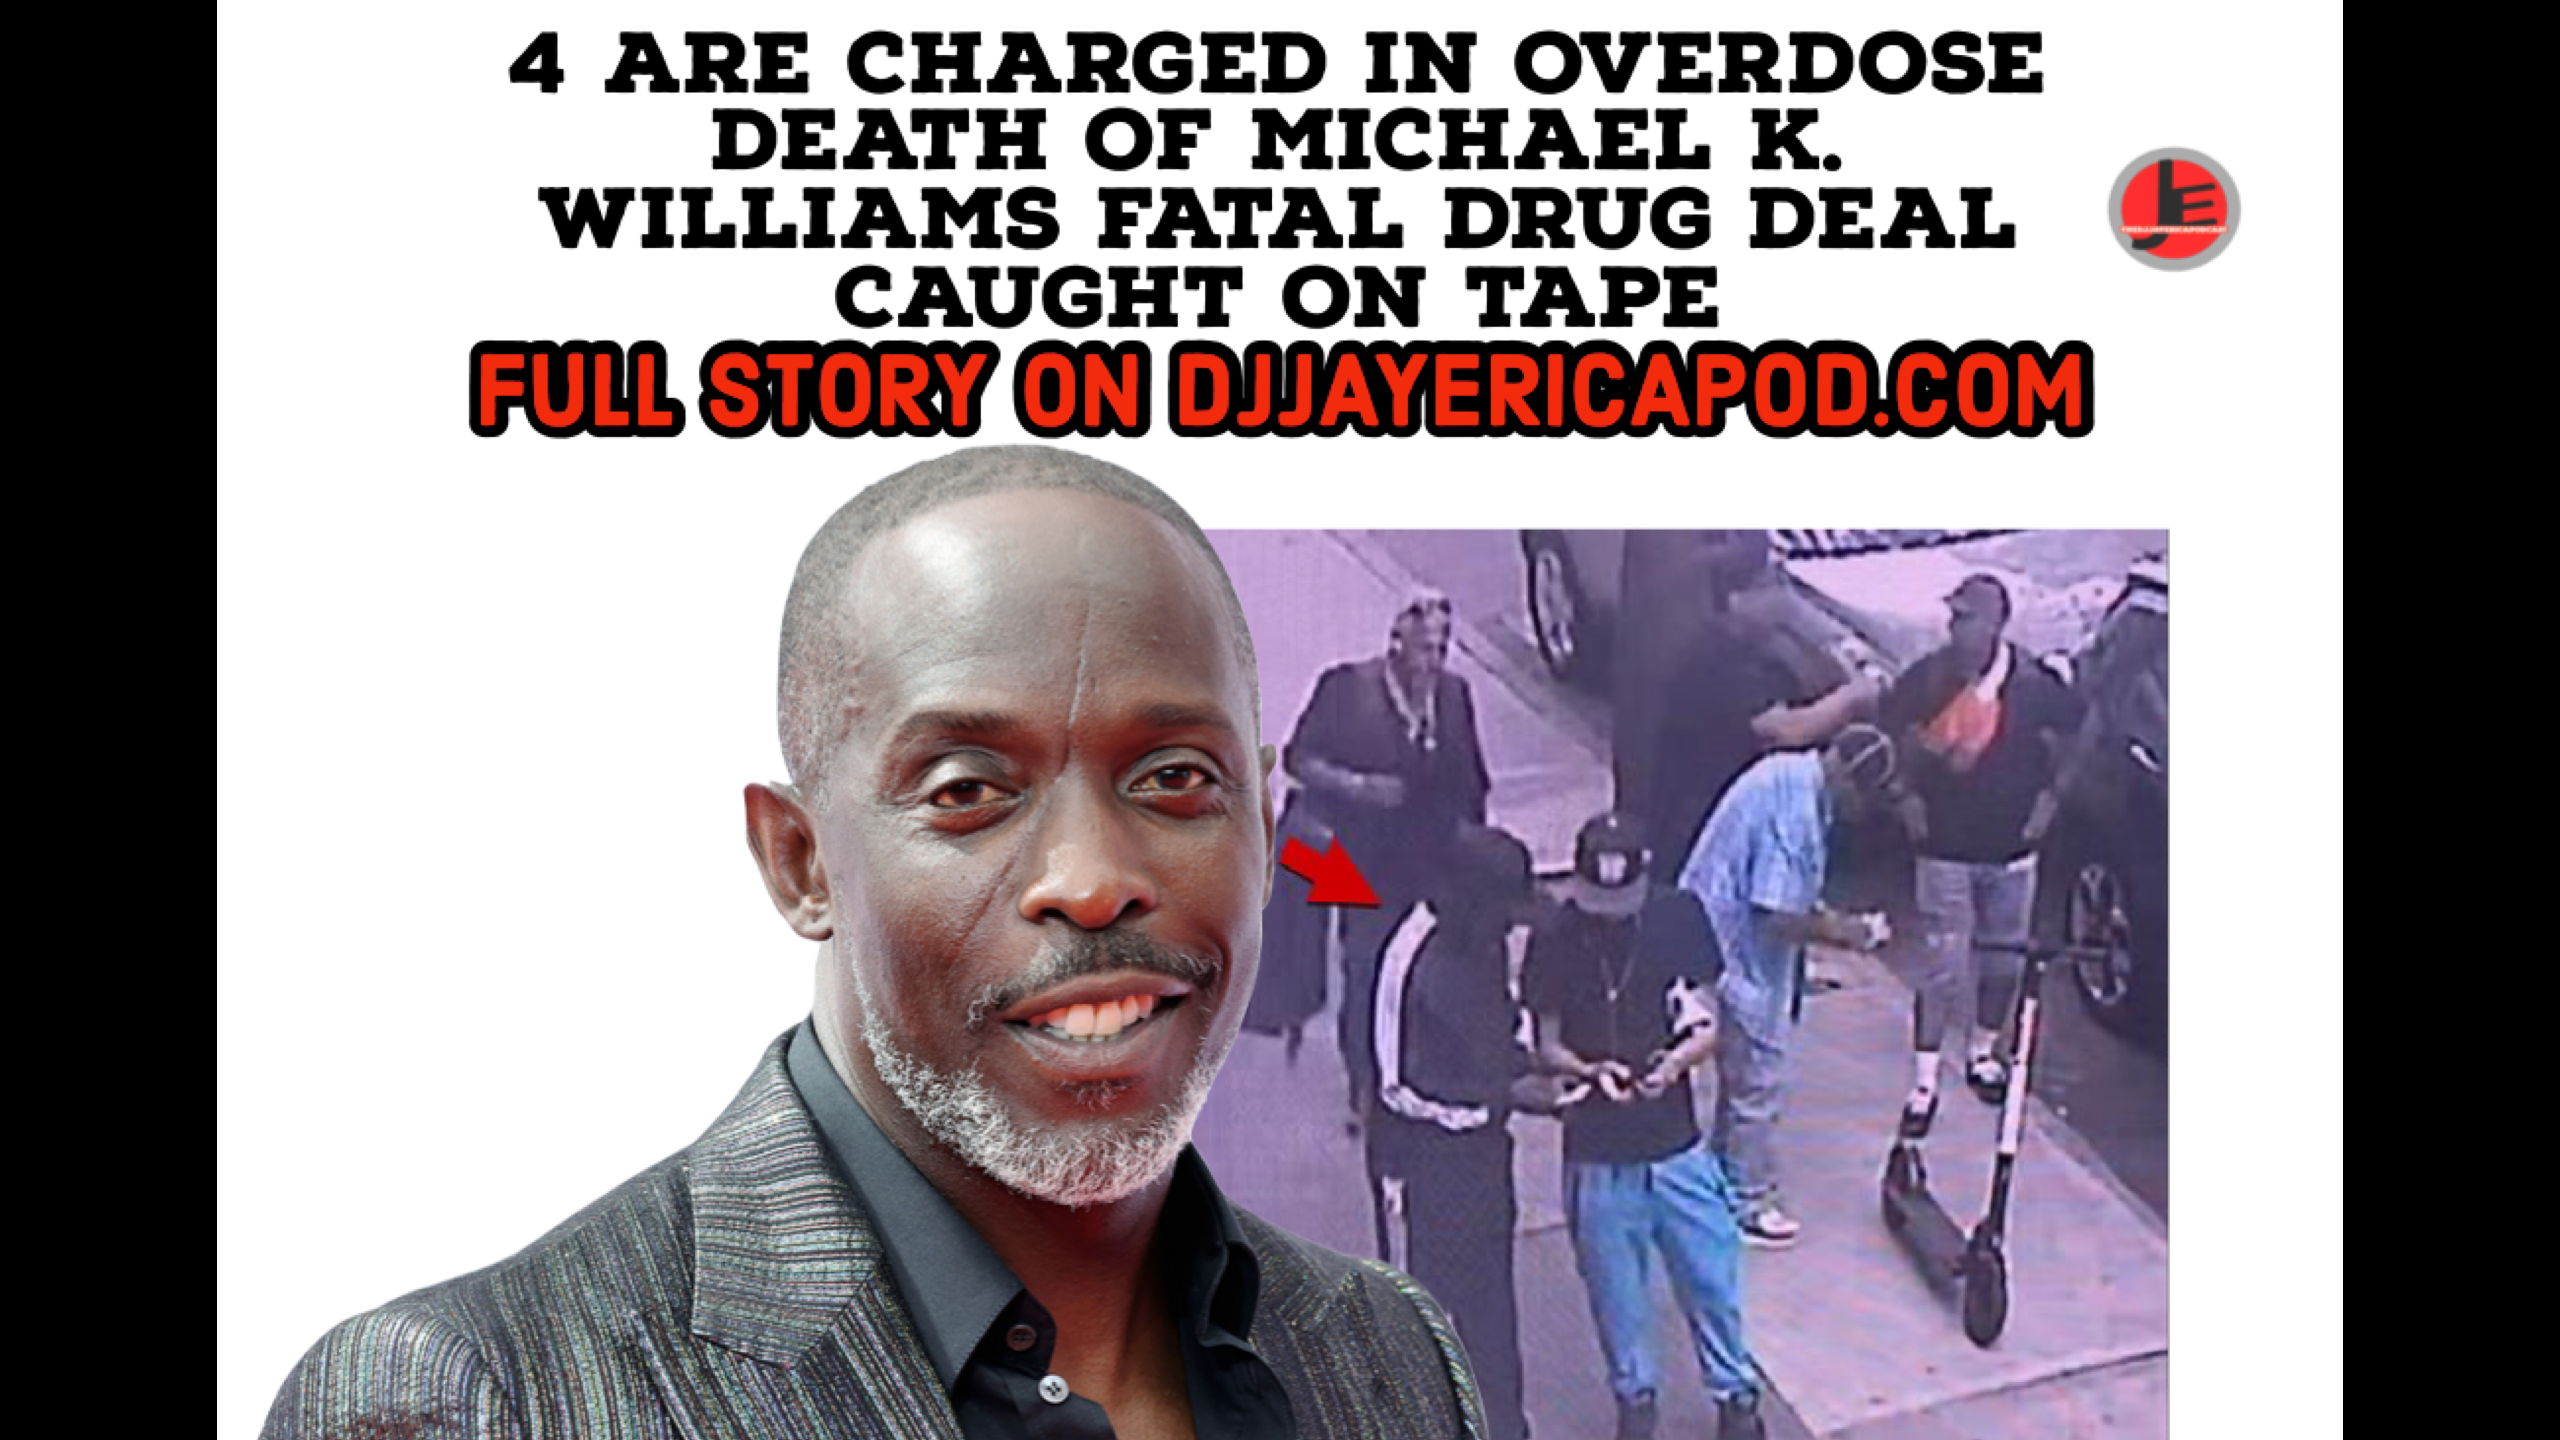 4 Are Charged in Overdose Death of Michael K. Williams Fatal Drug Deal Caught On Tape